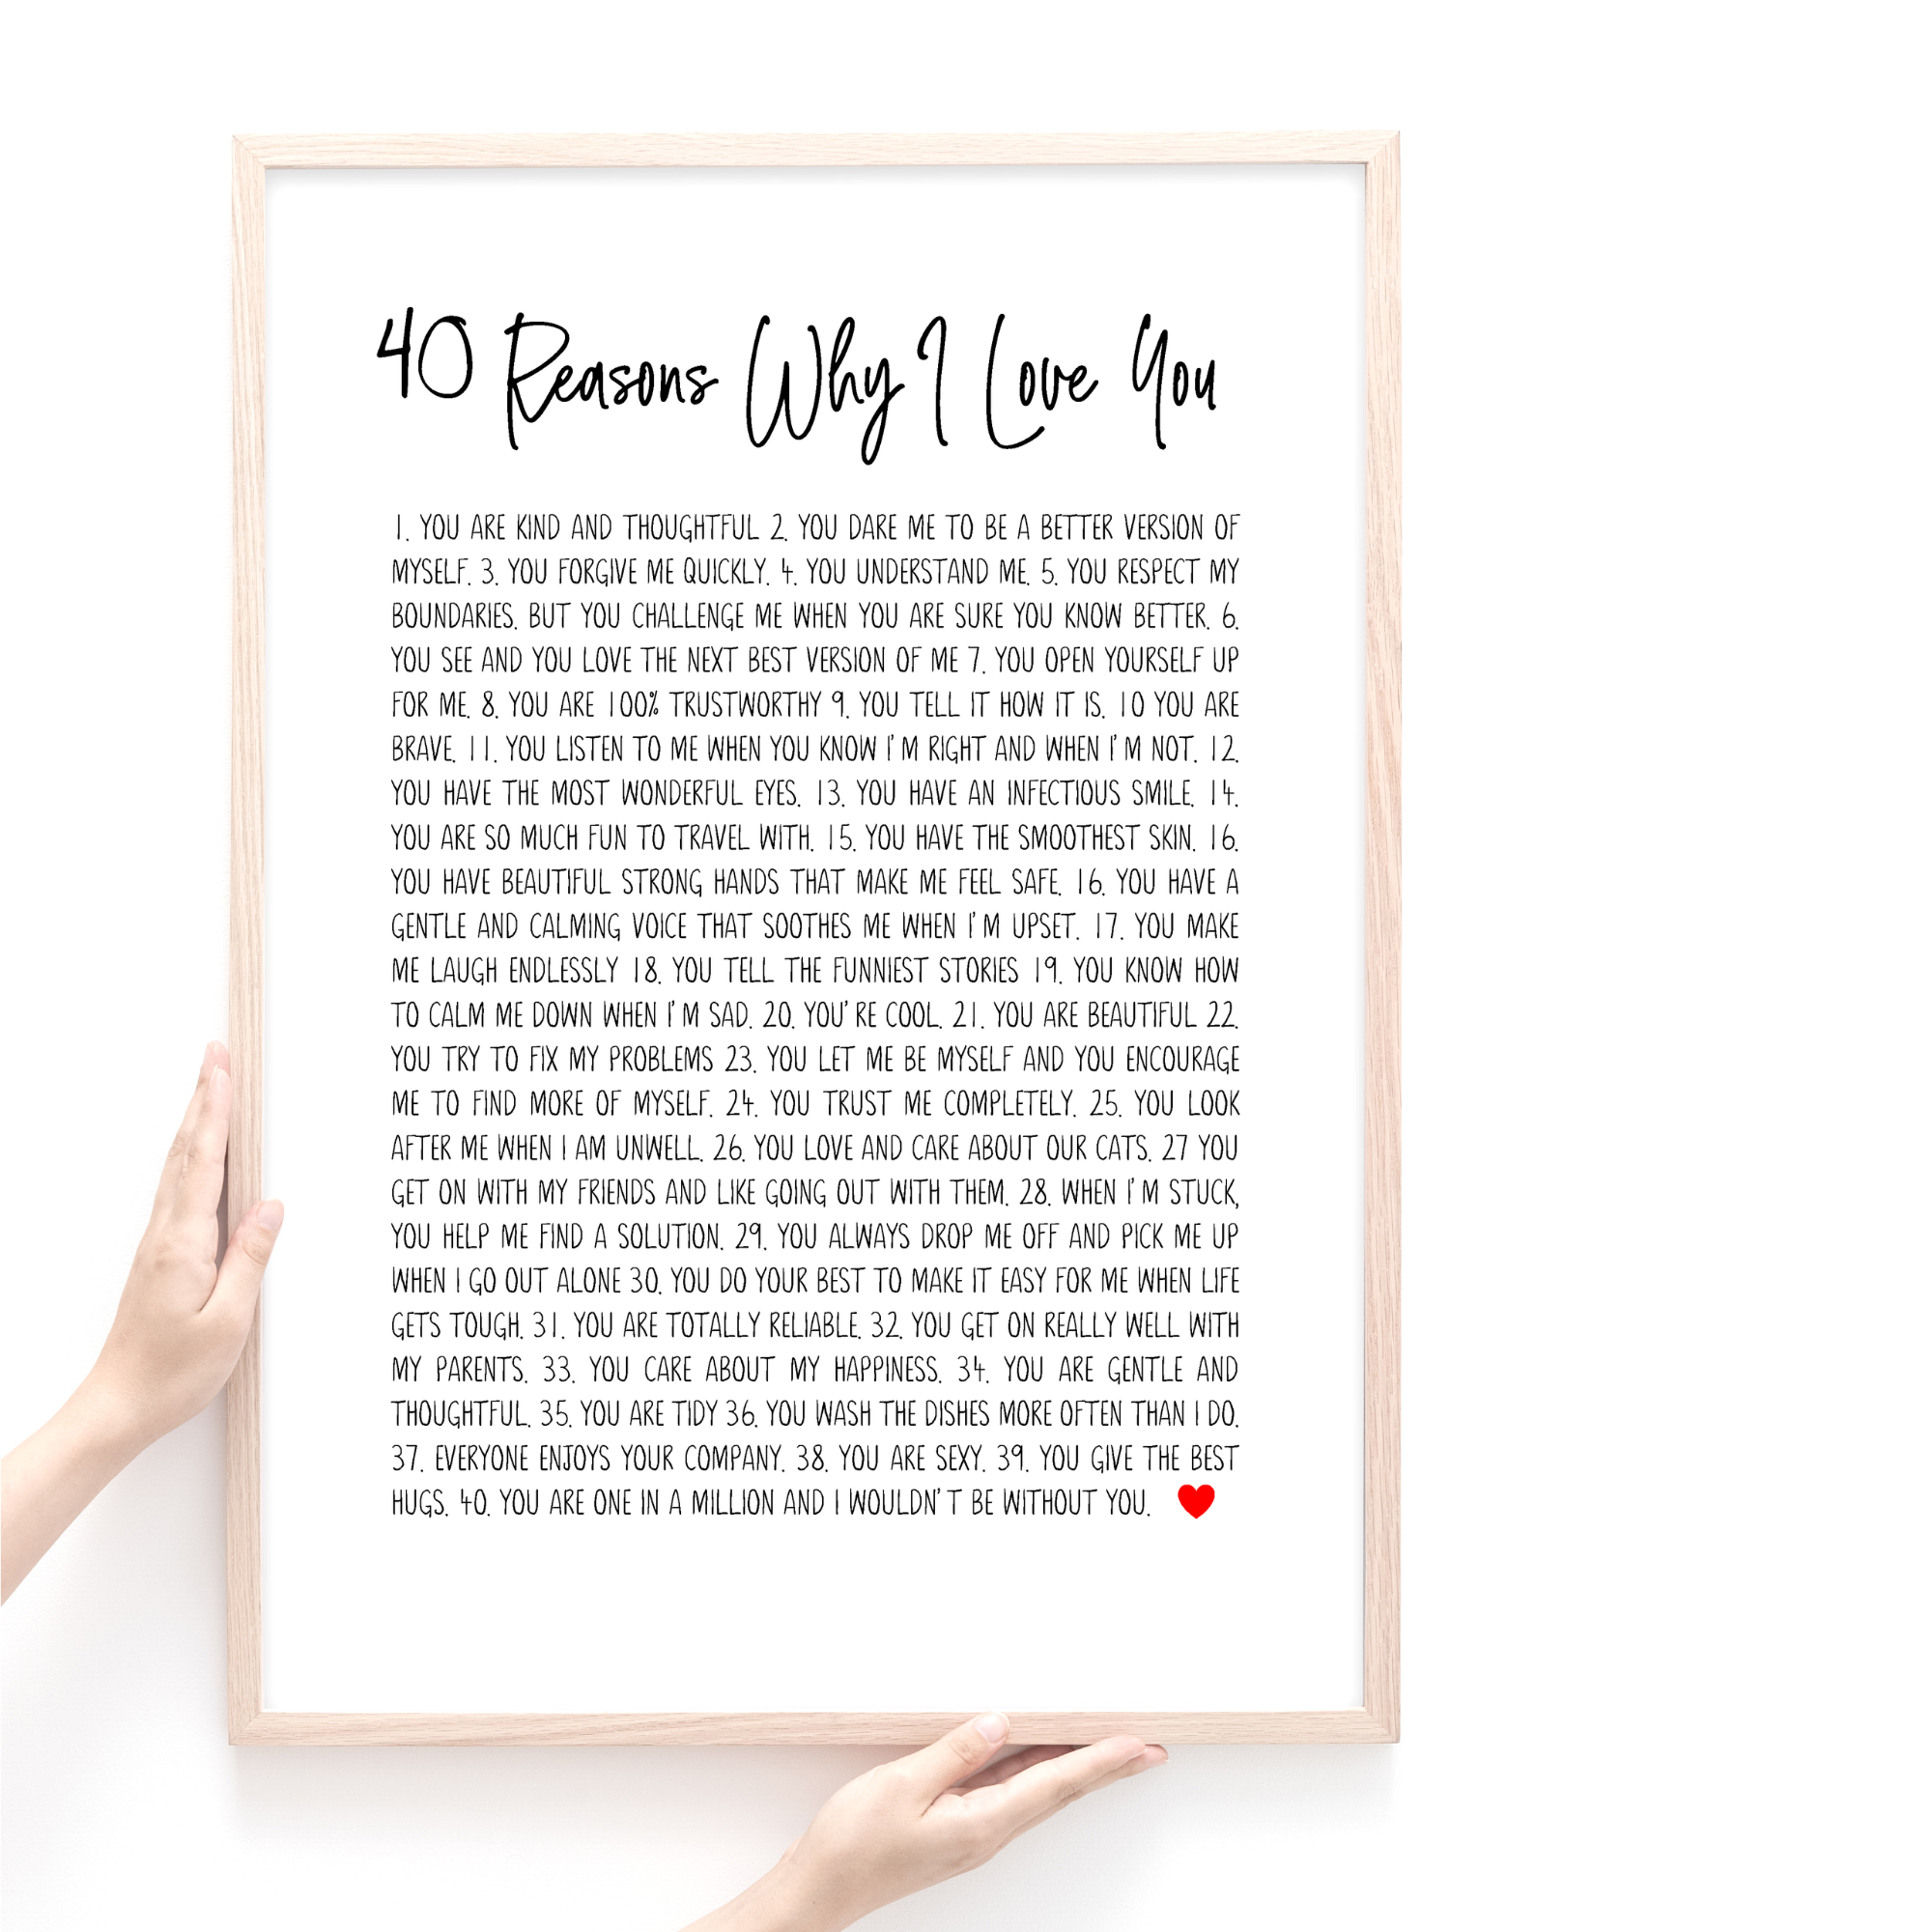 One Year Anniversary Gifts for Boyfriend 52 Reasons Why I Love You Jar Love  Notes DIY Paper Anniversary Gift for Him Sentimental Gifts 